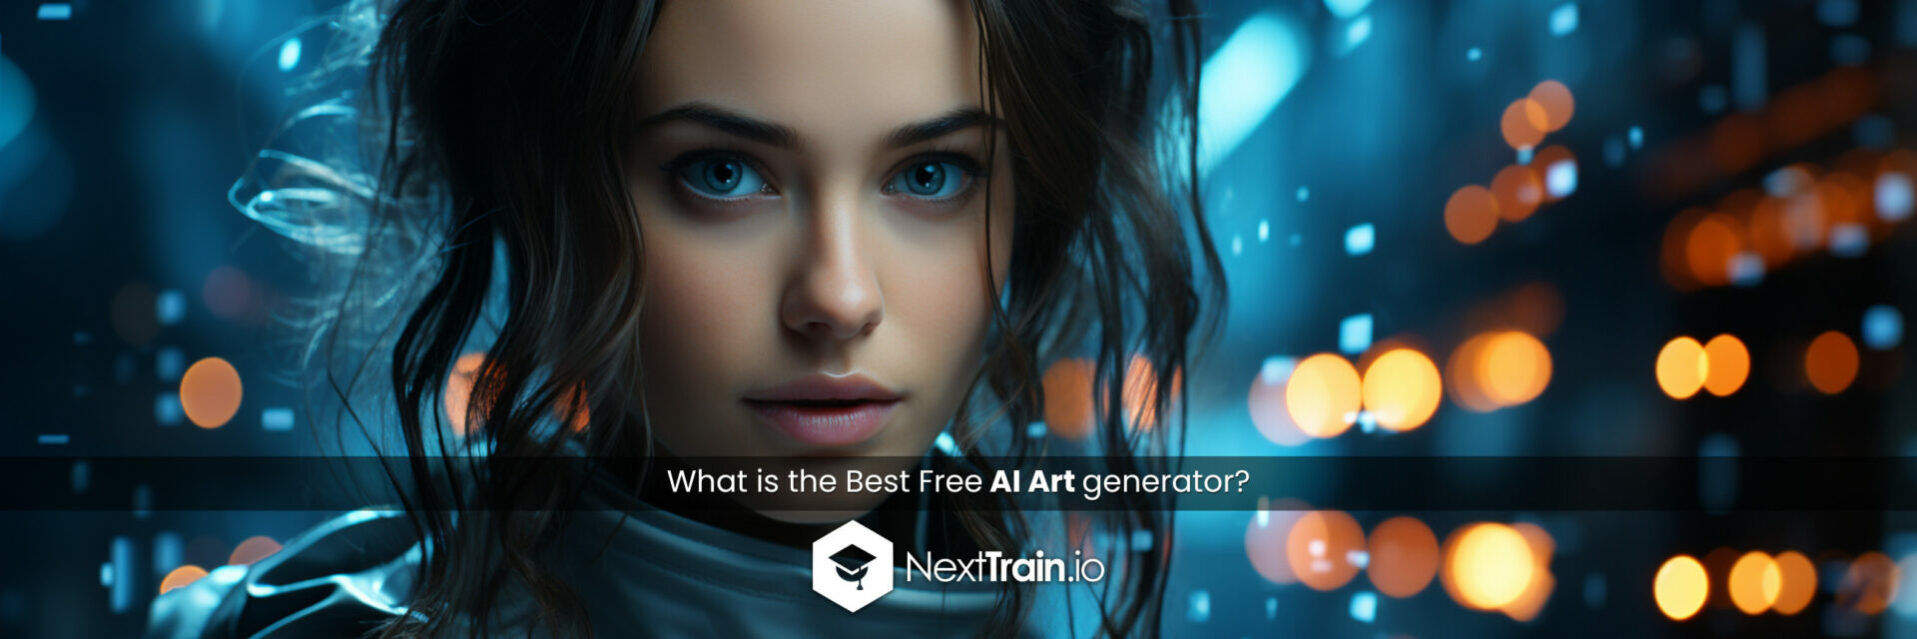 What is the Best Free AI Art generator?